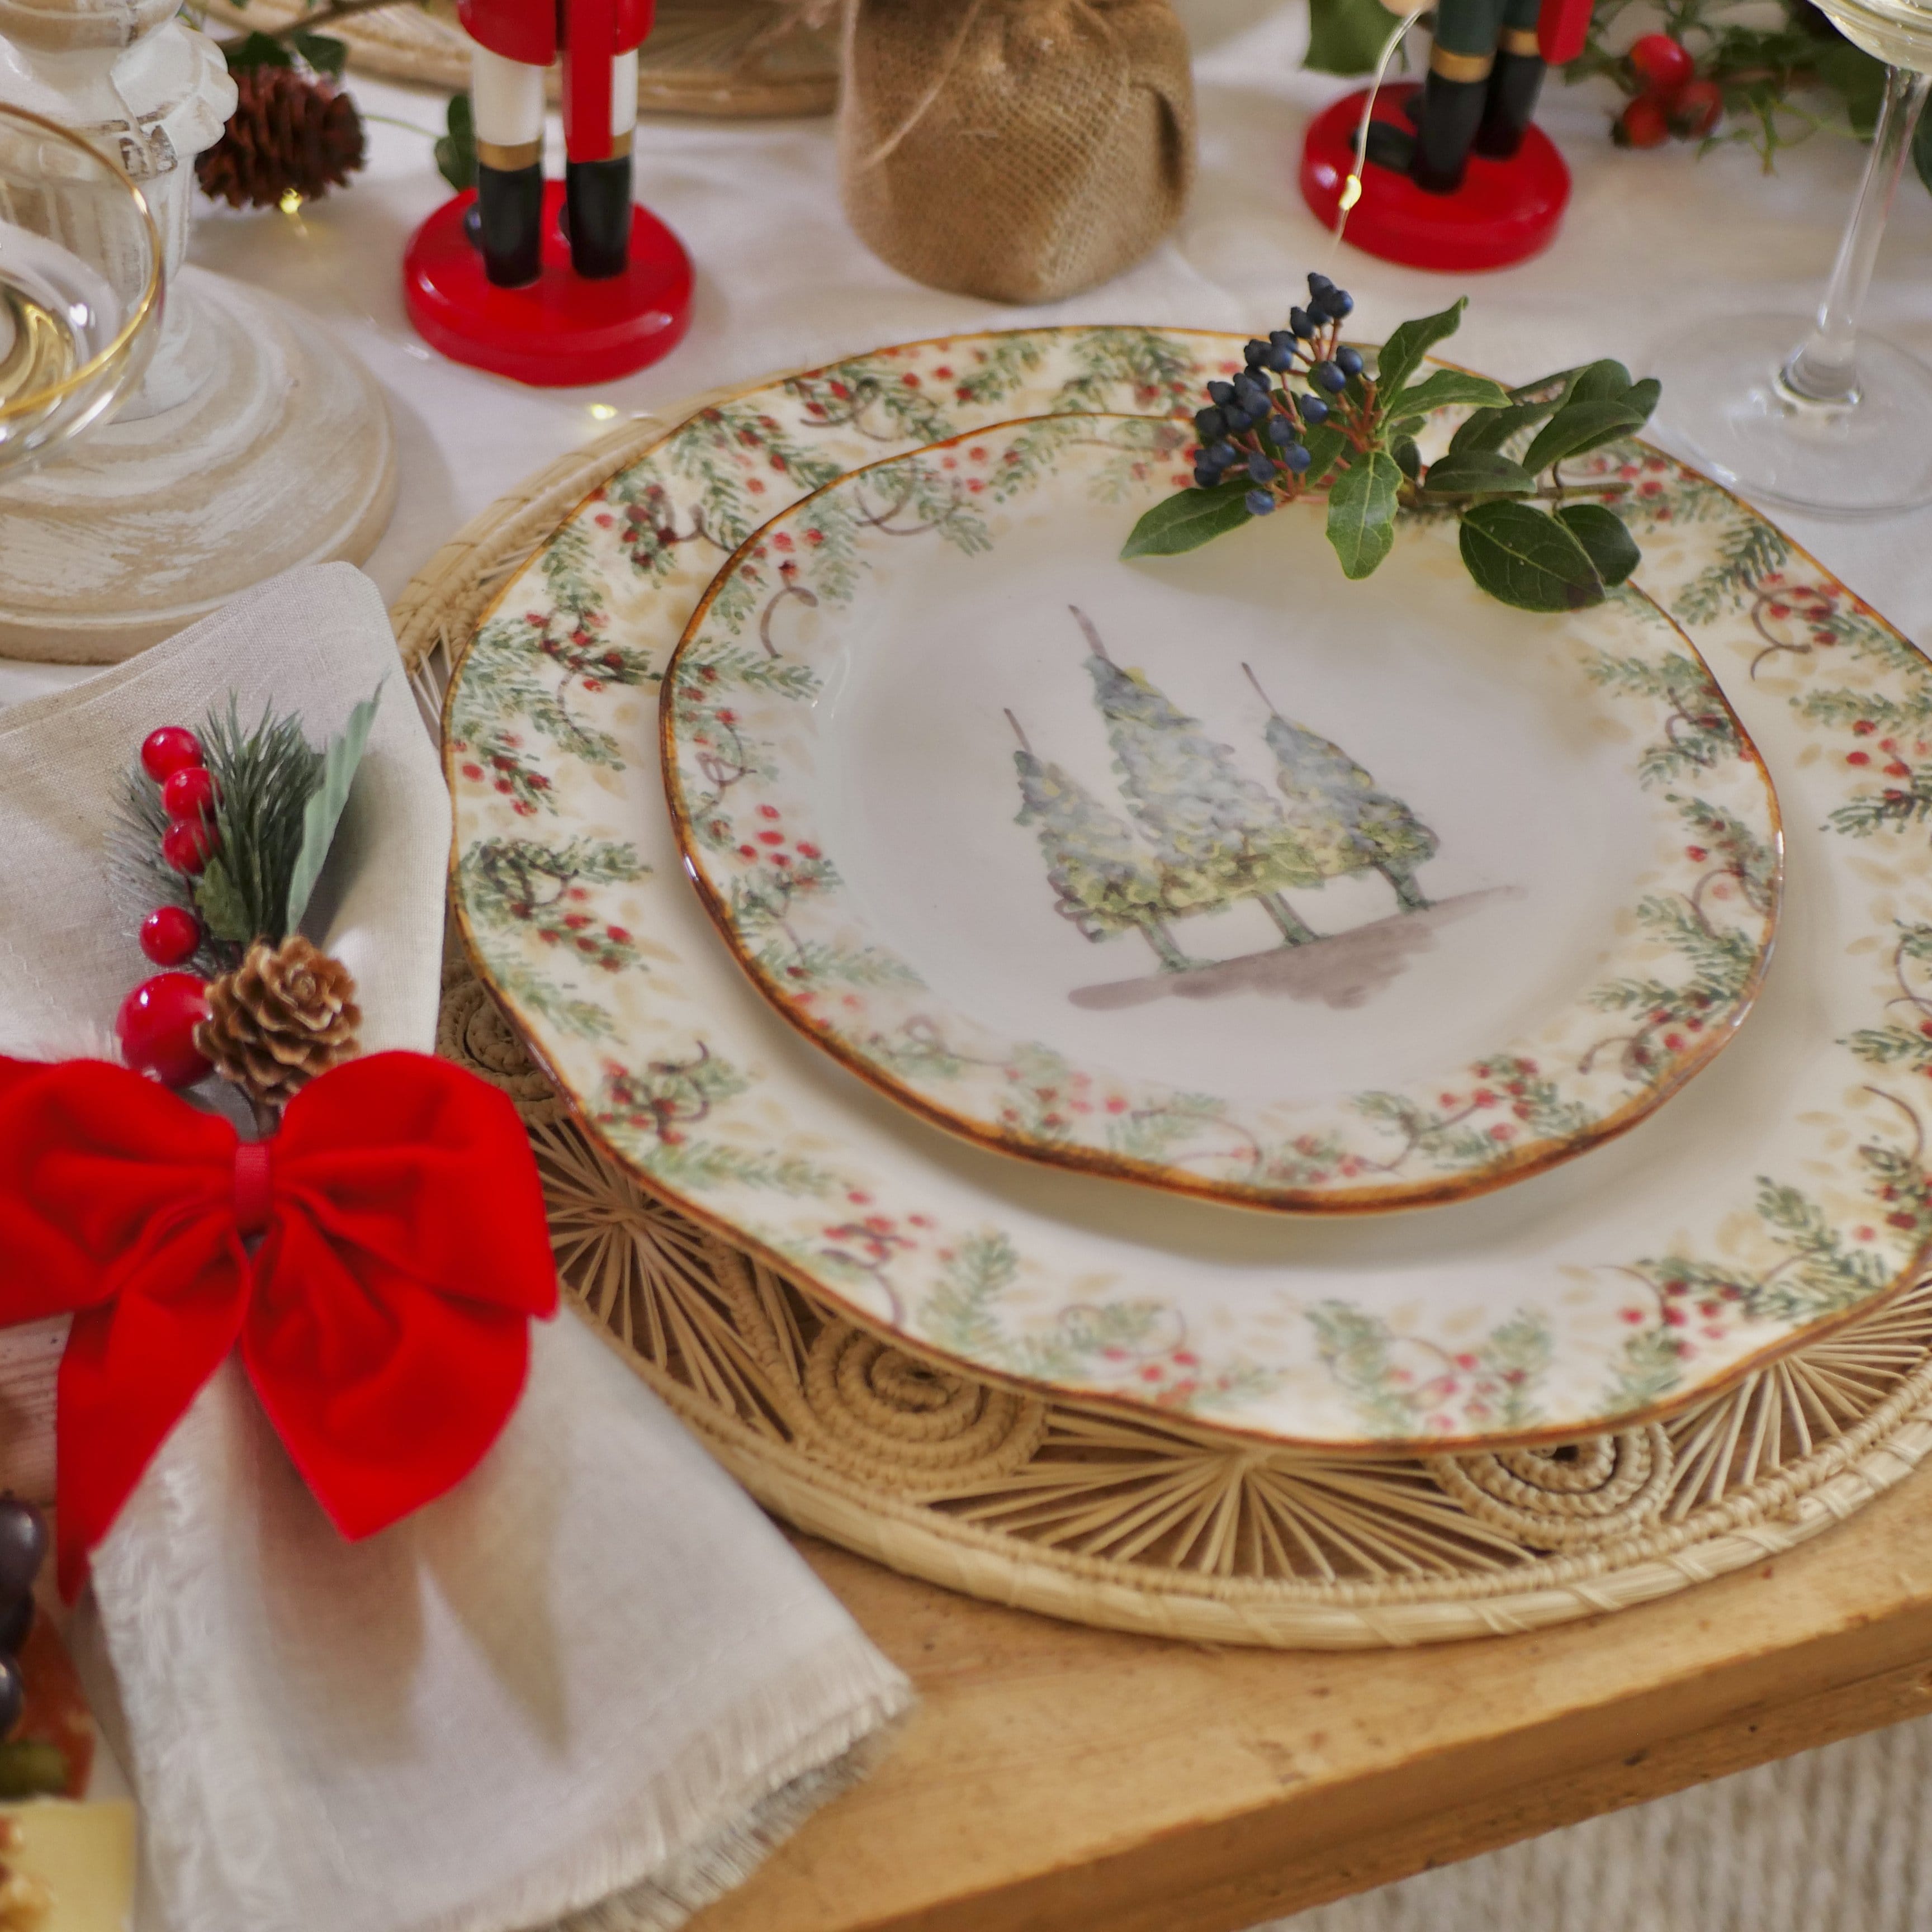 Christmas Tablescape Arte Italica Natale Plates, Red Velvet Napkin Bows, Colombian Placemats